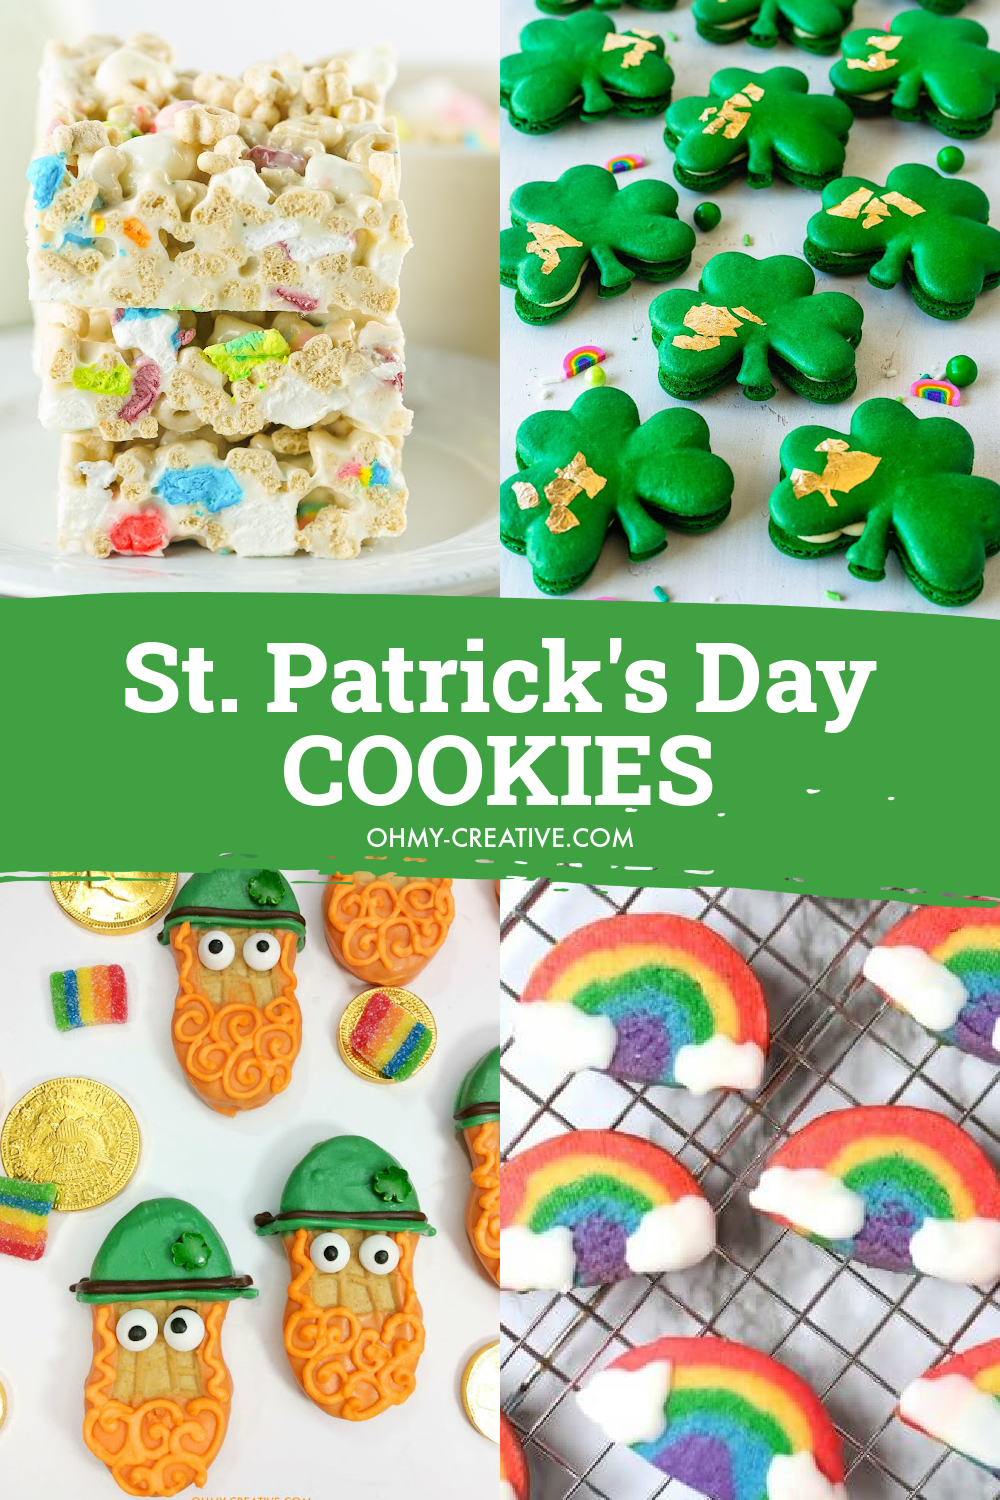 A collage of St. Patrick's Day cookies including Lucky Charms rice Krispie treats, shamrock cookies and rainbow cookies.